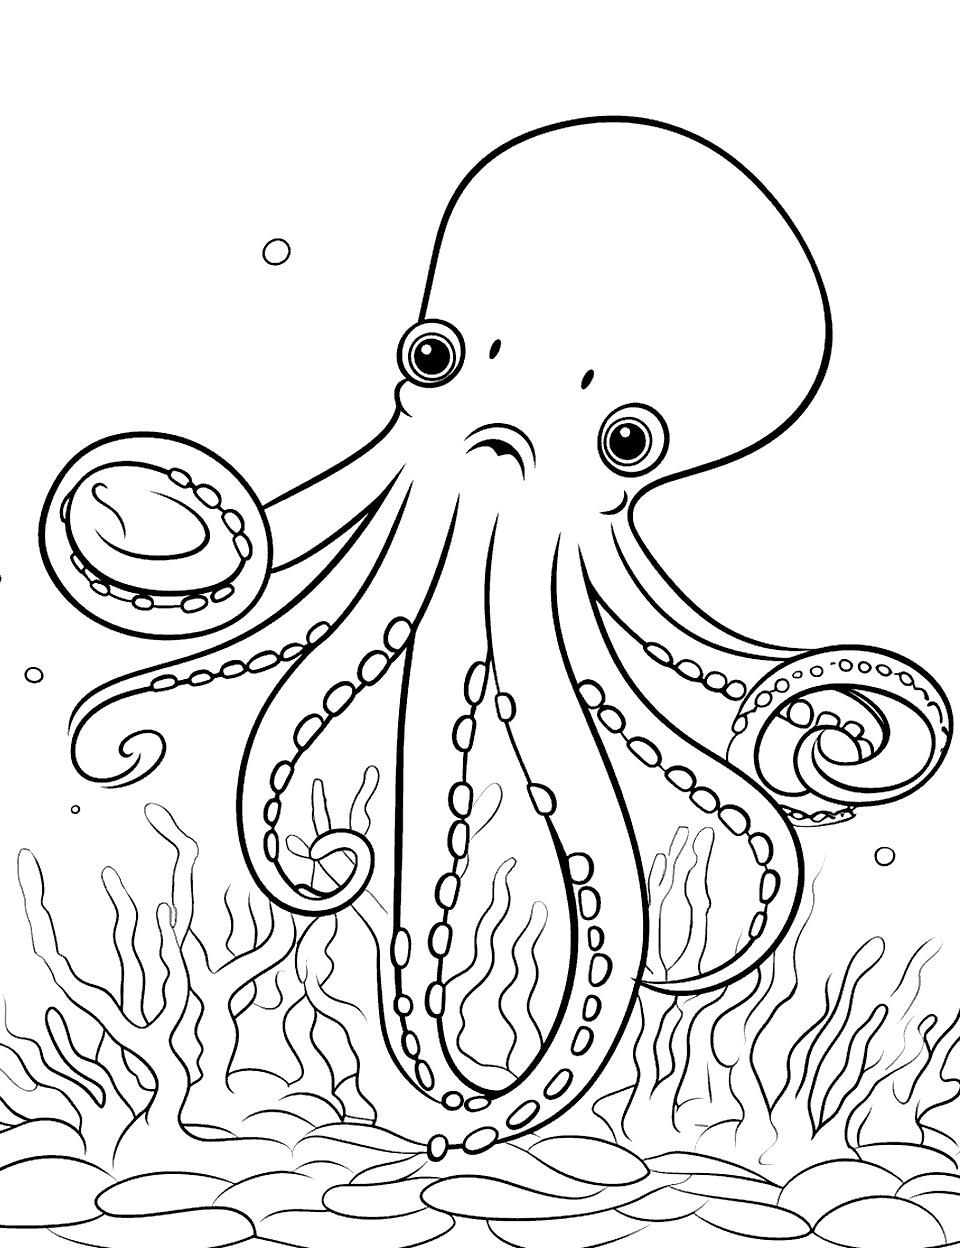 Octopus on Coral Coloring Page - A stunning octopus sitting atop a piece of coral.